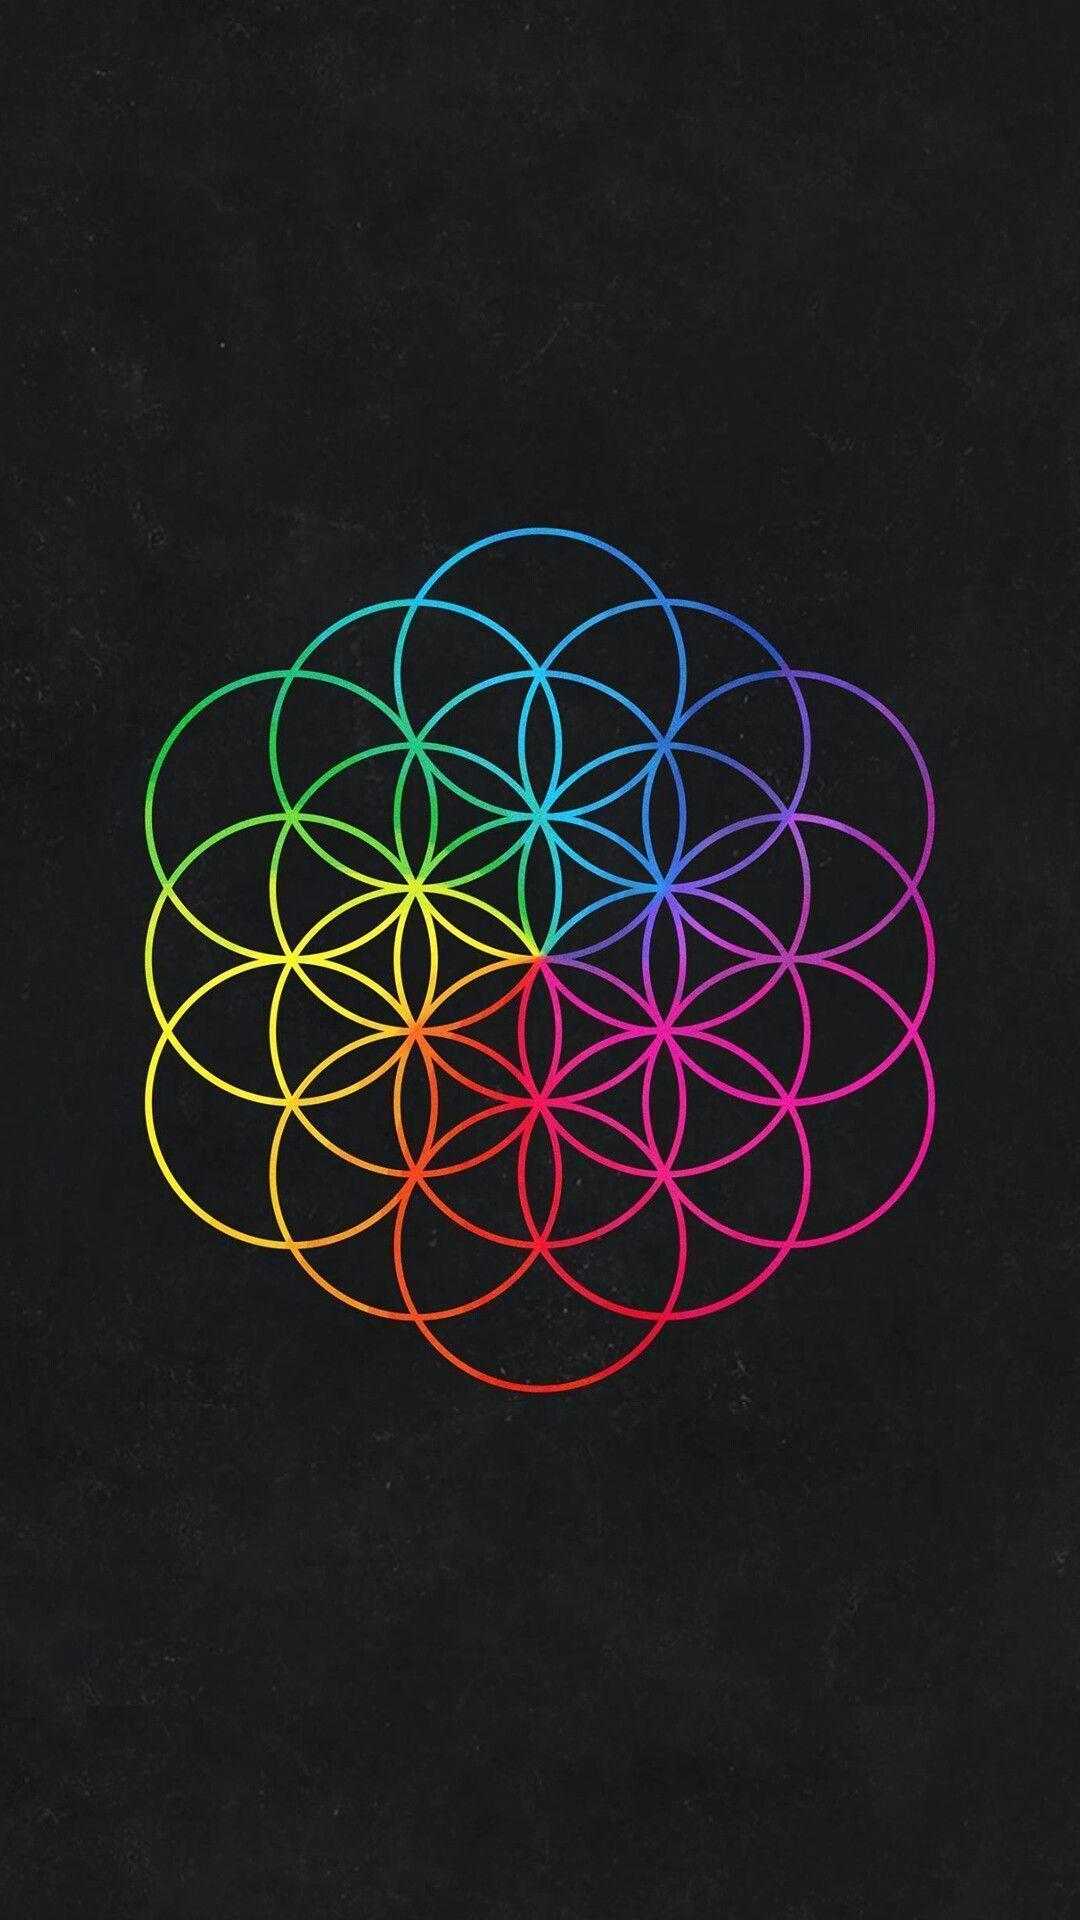 The Flower of Life on Coldplay's new (and awesome) album that I'm